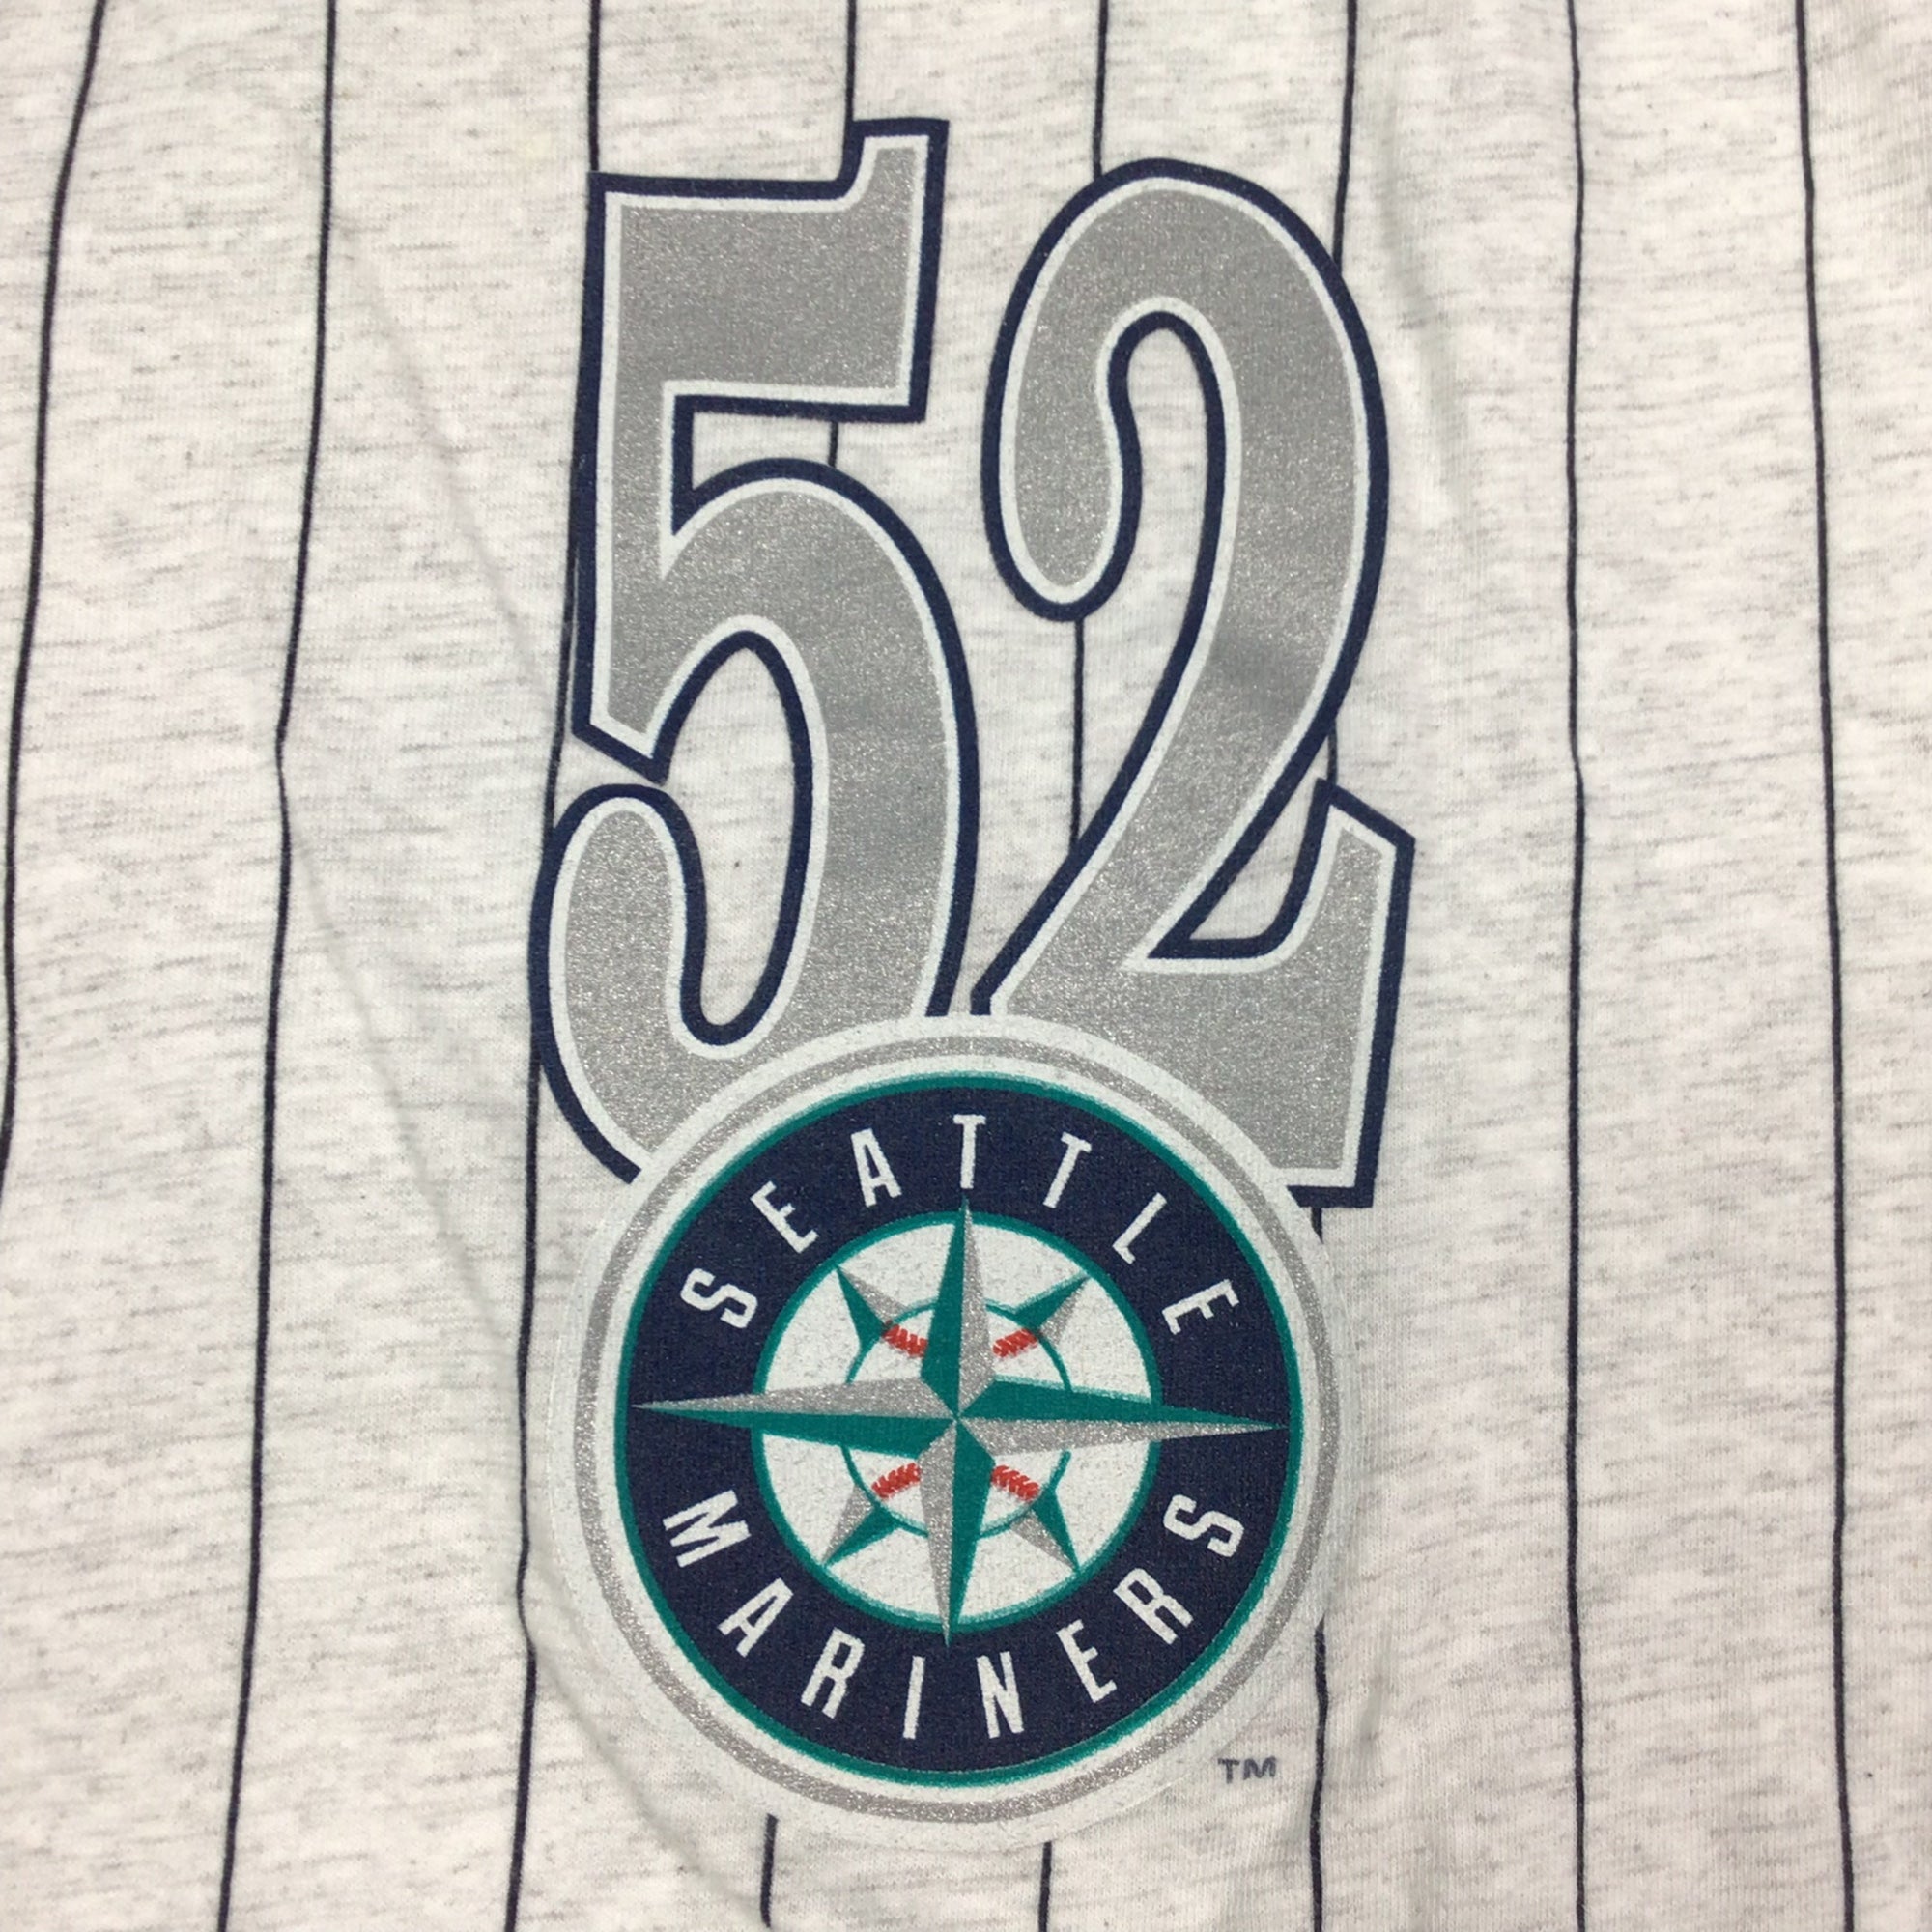 Vintage 1995 Seattle Mariners MLB TAZ T-shirt. Made in the 